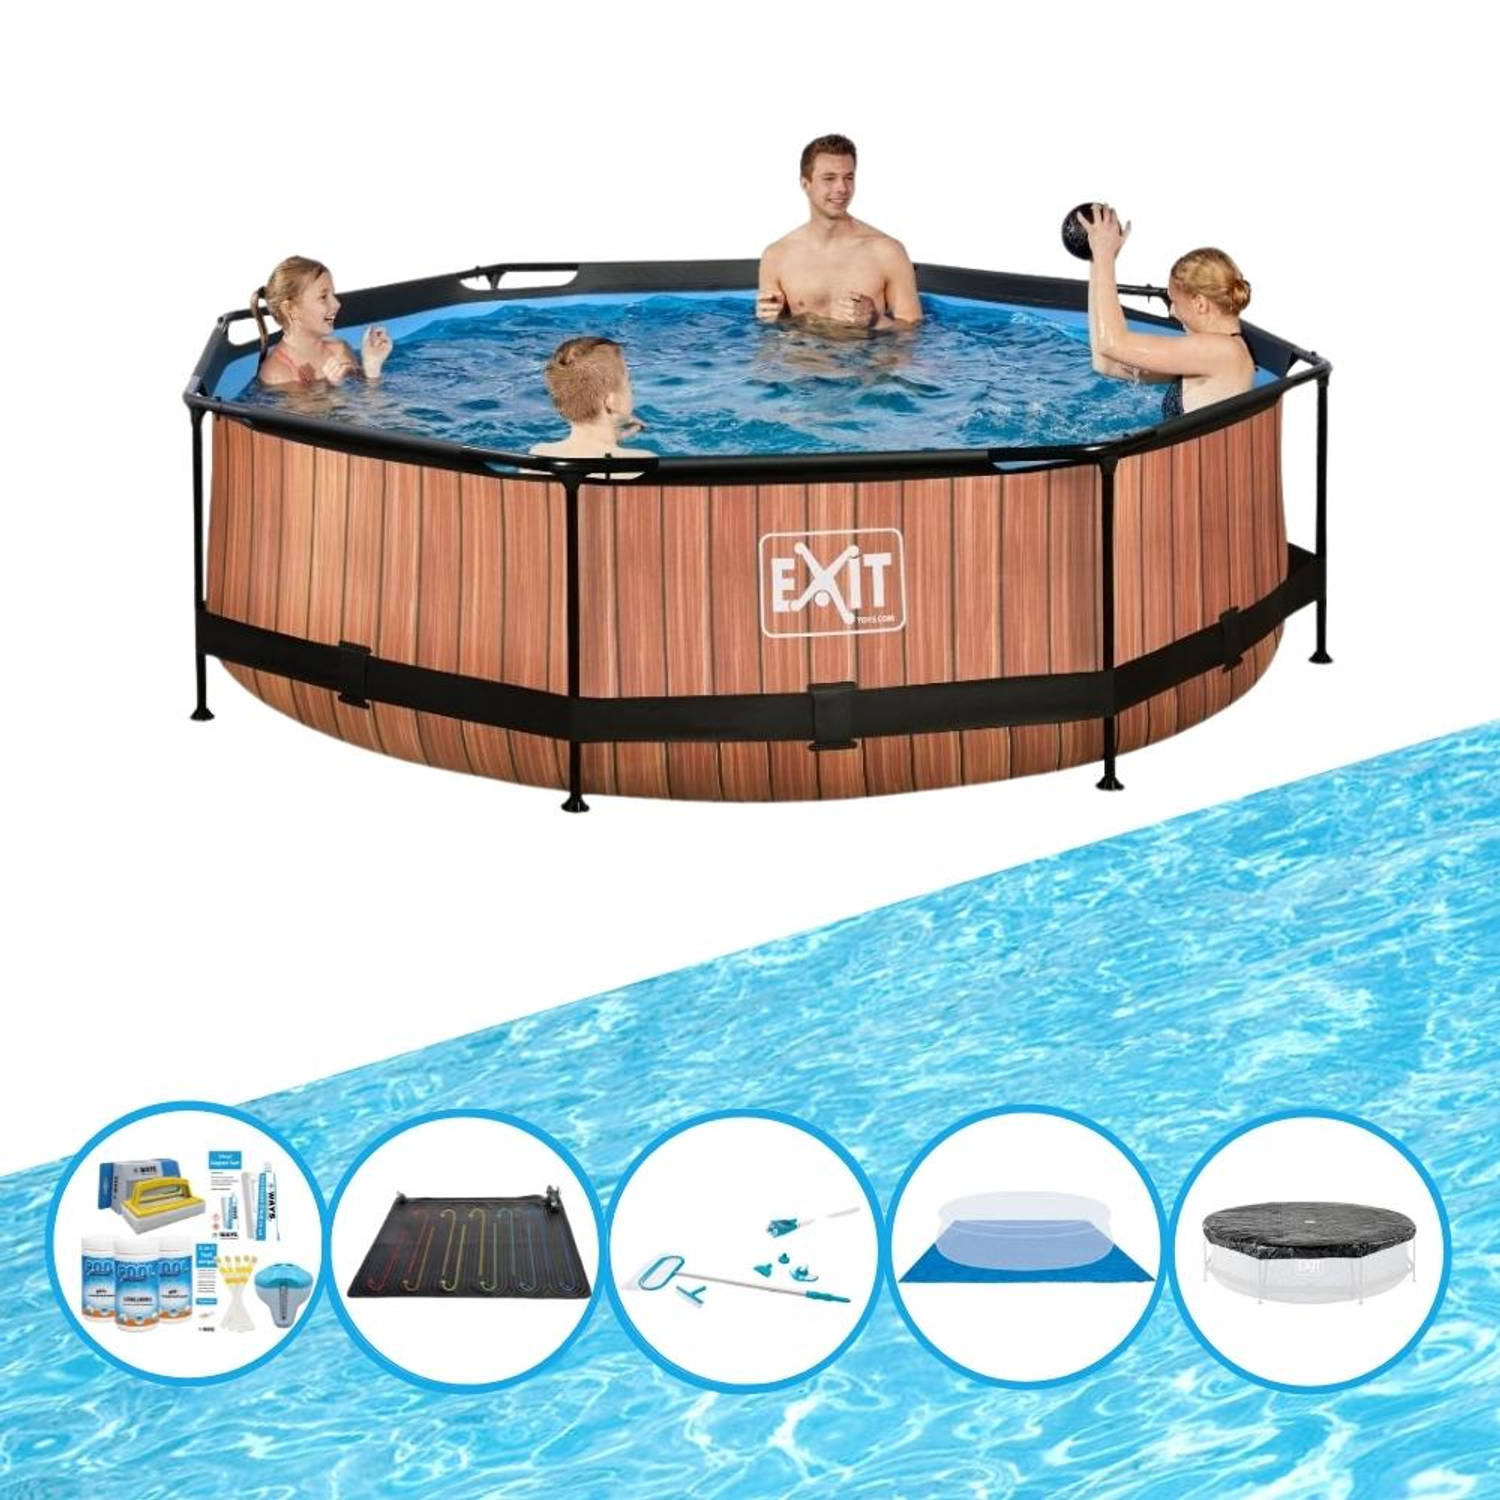 EXIT Zwembad Timber Style - Frame Pool ø300x76cm - Inclusief bijbehorende accessoires